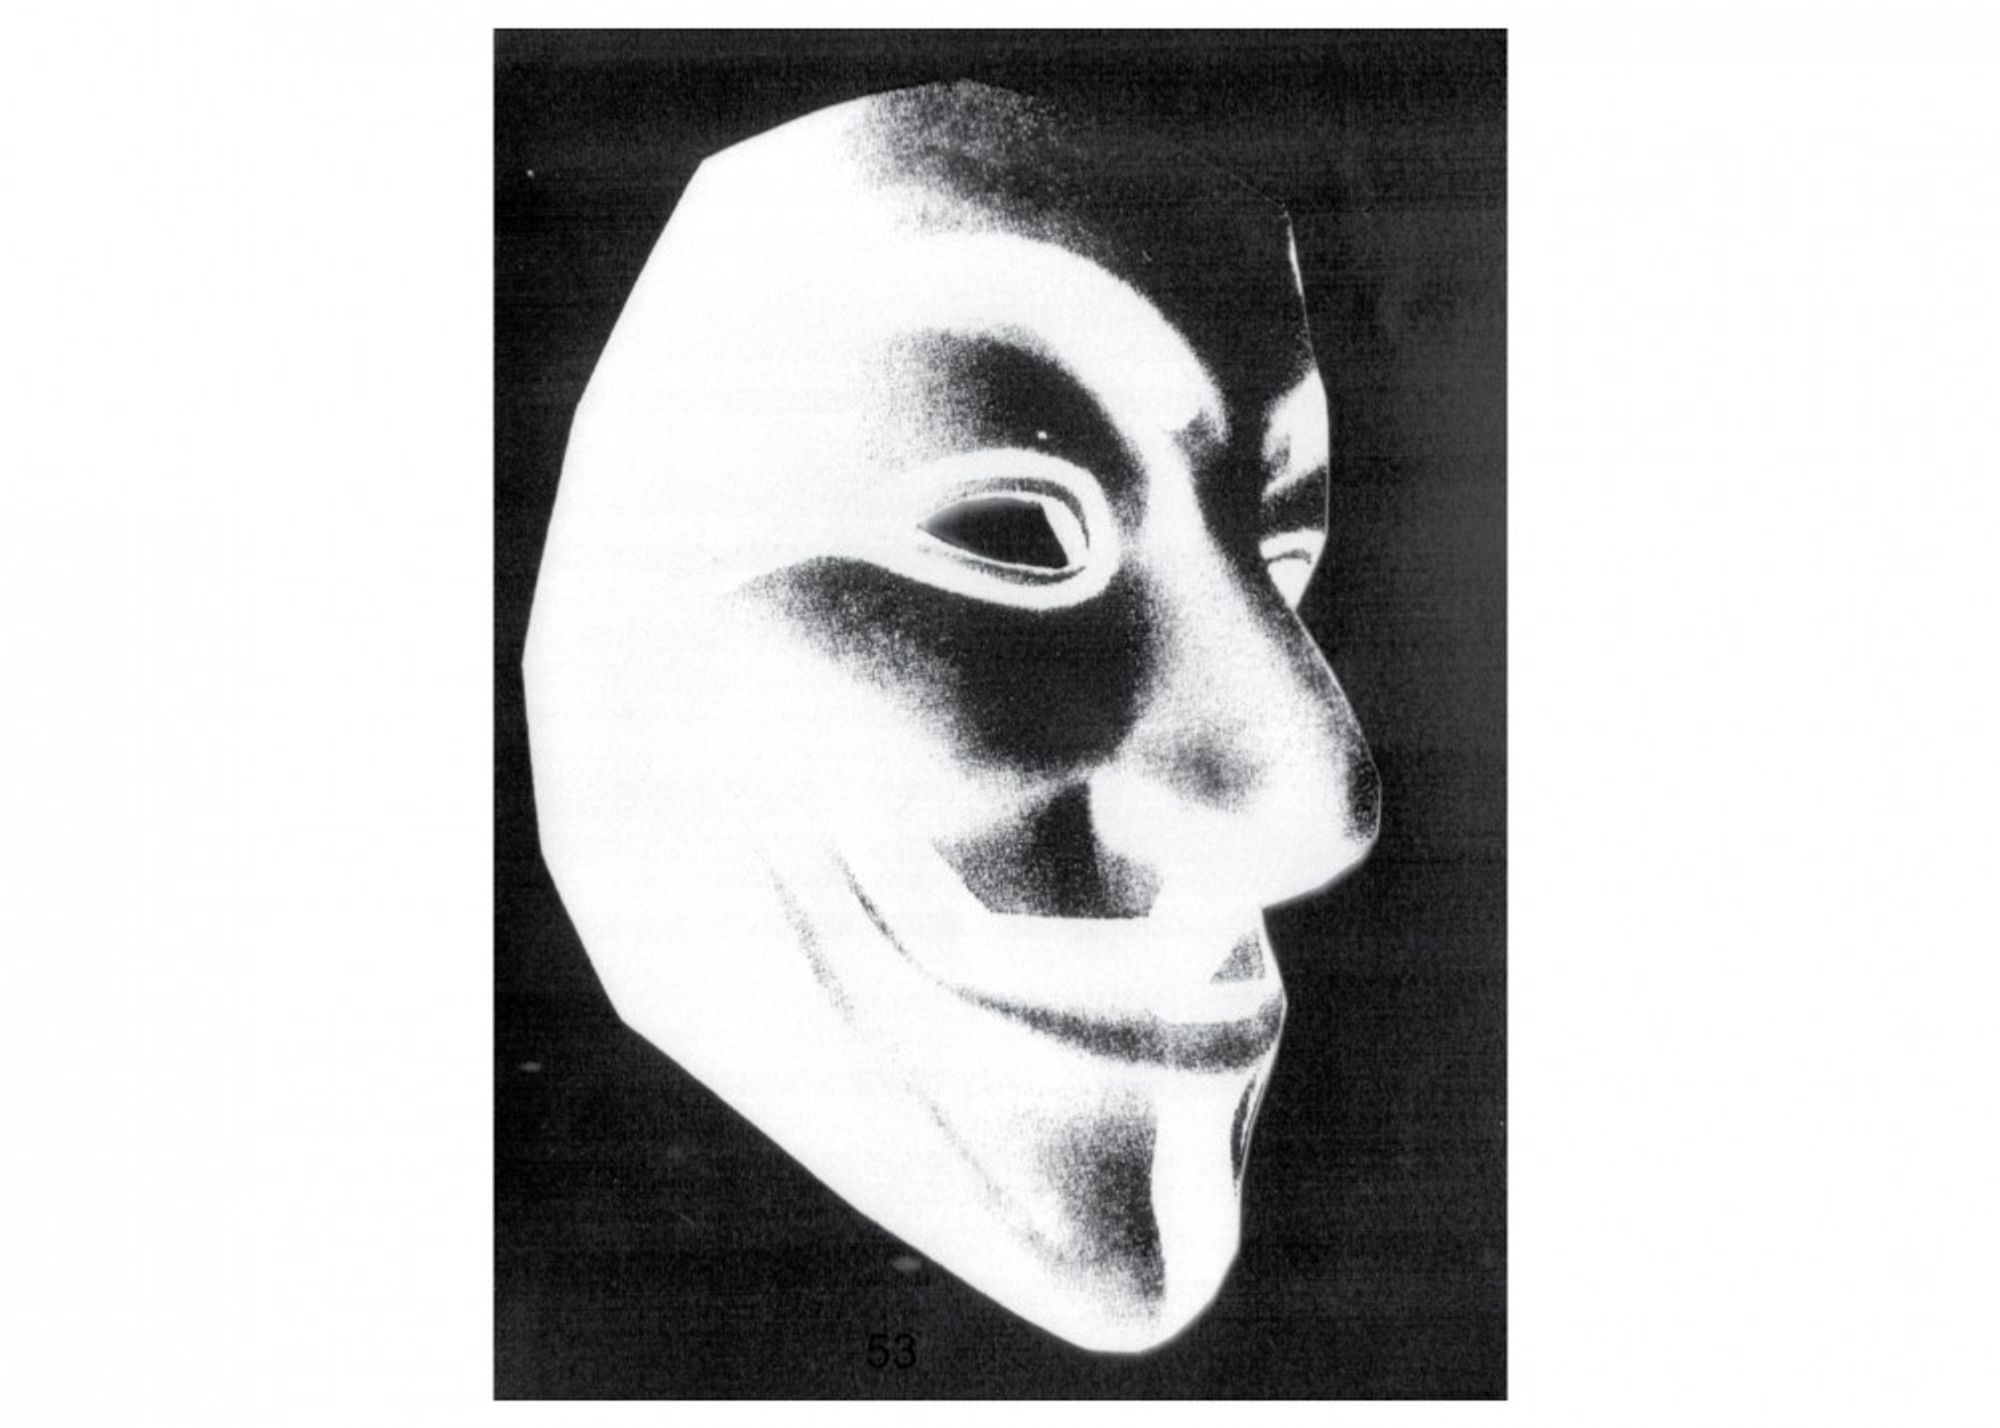 PIN–UP MASK UP: How The Mask Became One Of The Most Iconic Design Objects In Recent History